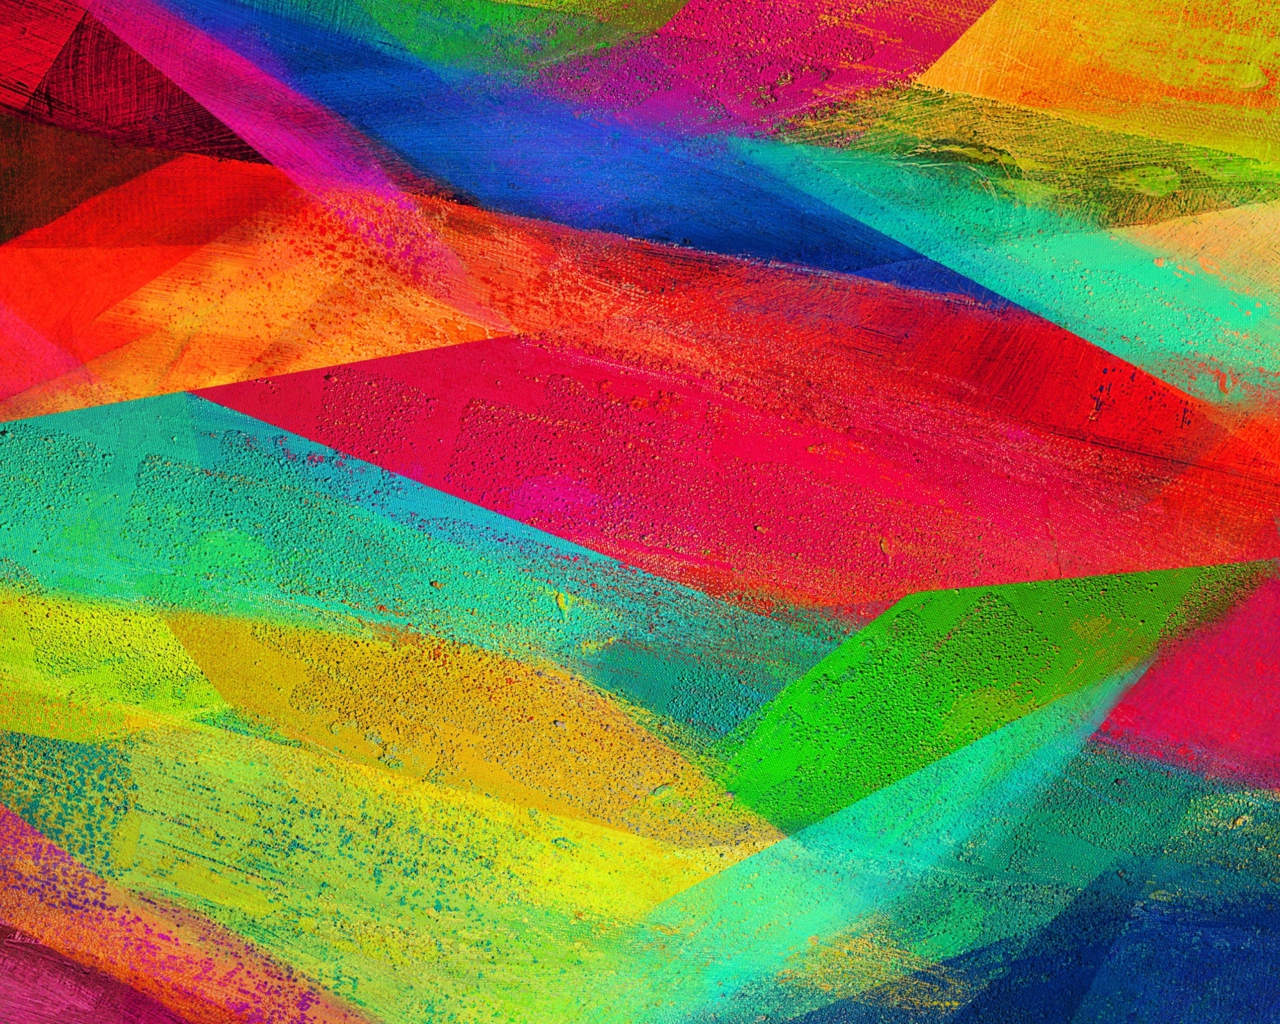 Colorful Samsung Galaxy Note 4 wallpaper 1280x1024